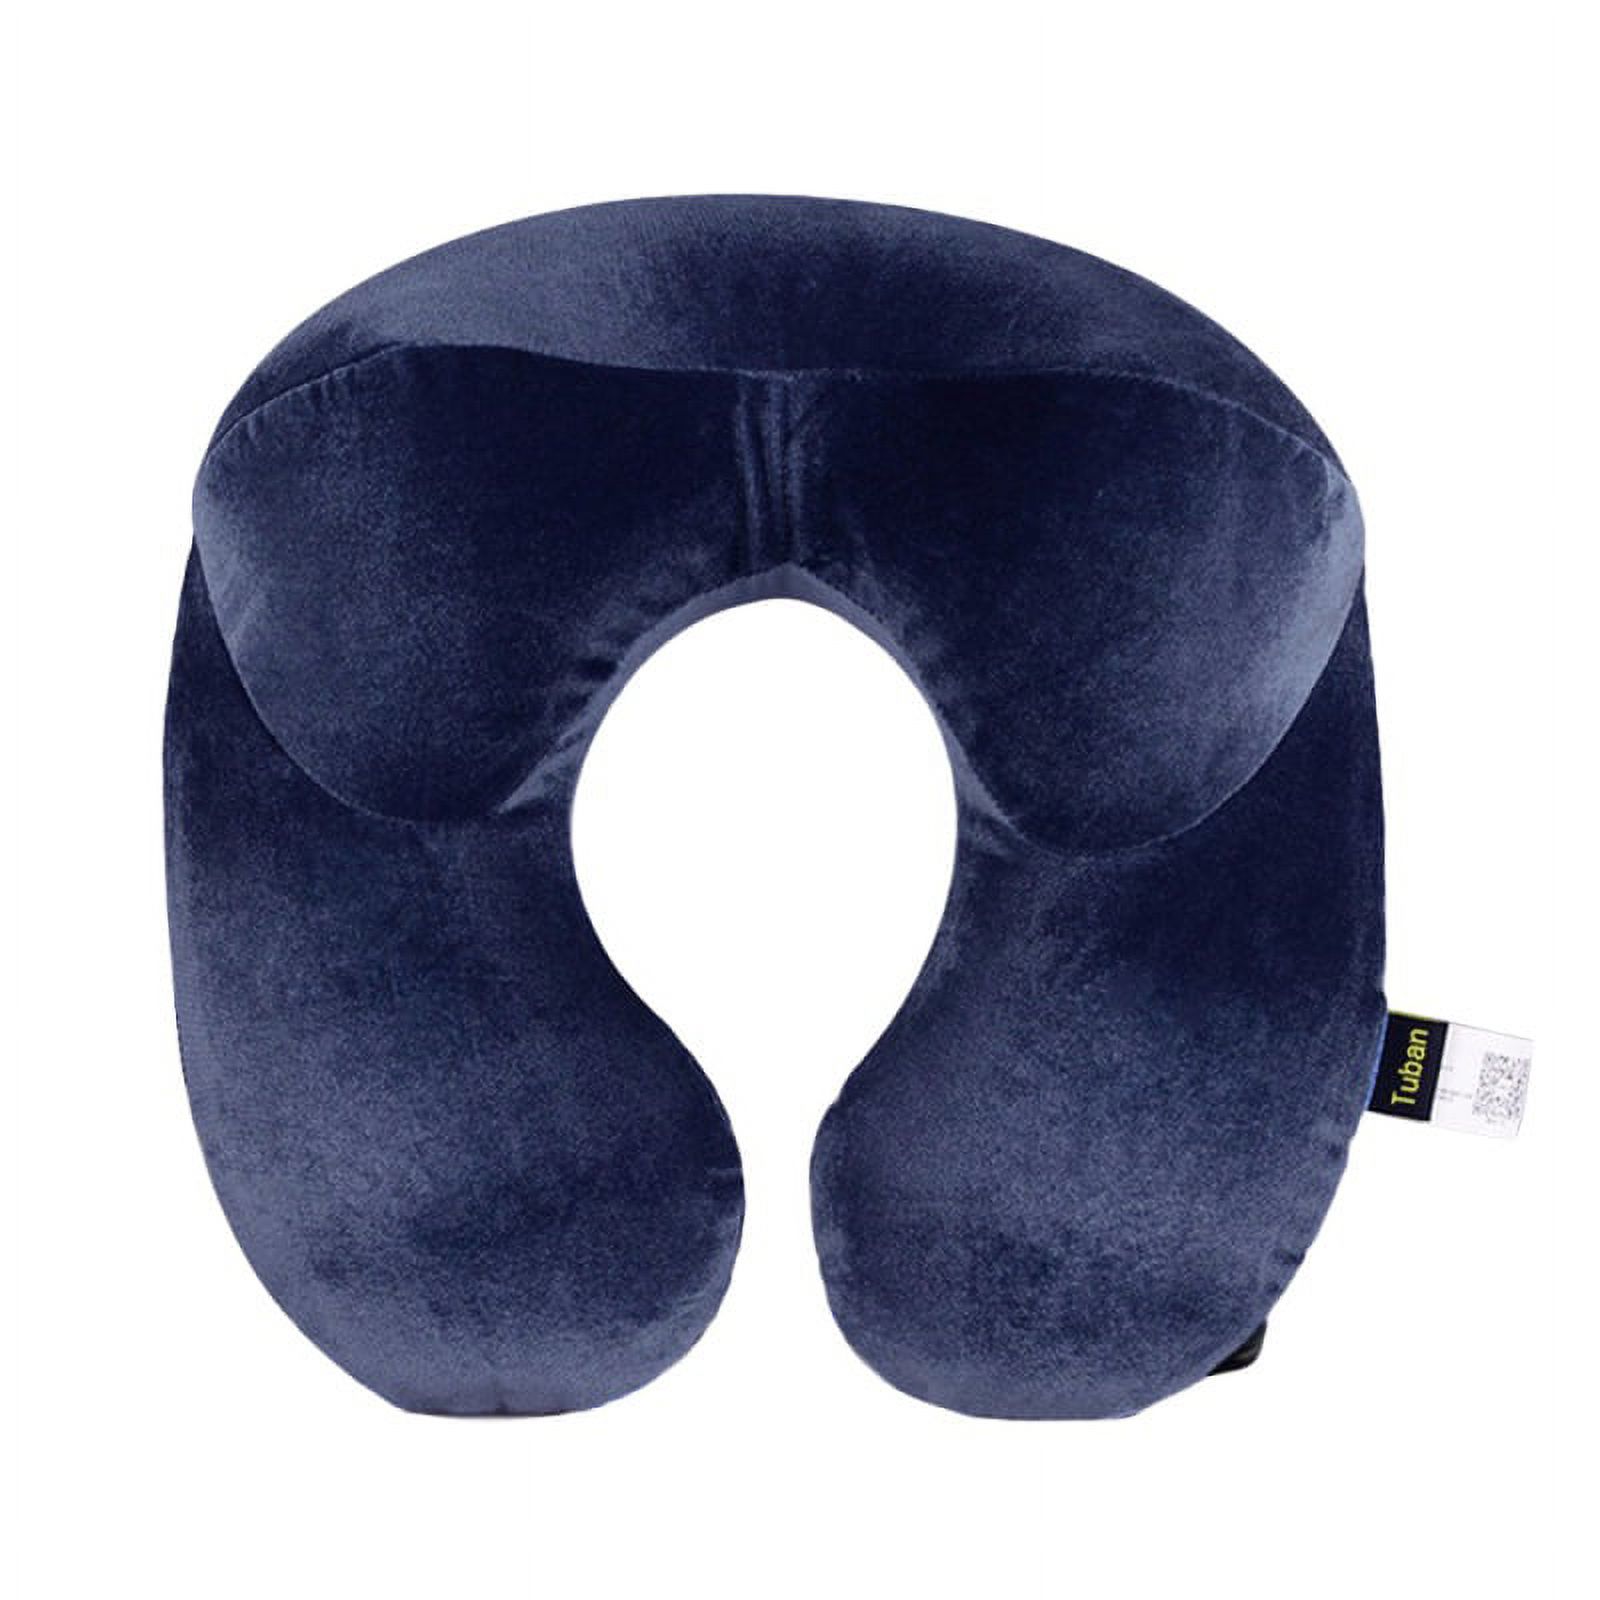 Inflatable Soft Velvet Travel Neck Pillow Set, U Shape, Neck Support for Cars, Airplanes Camping - image 2 of 5